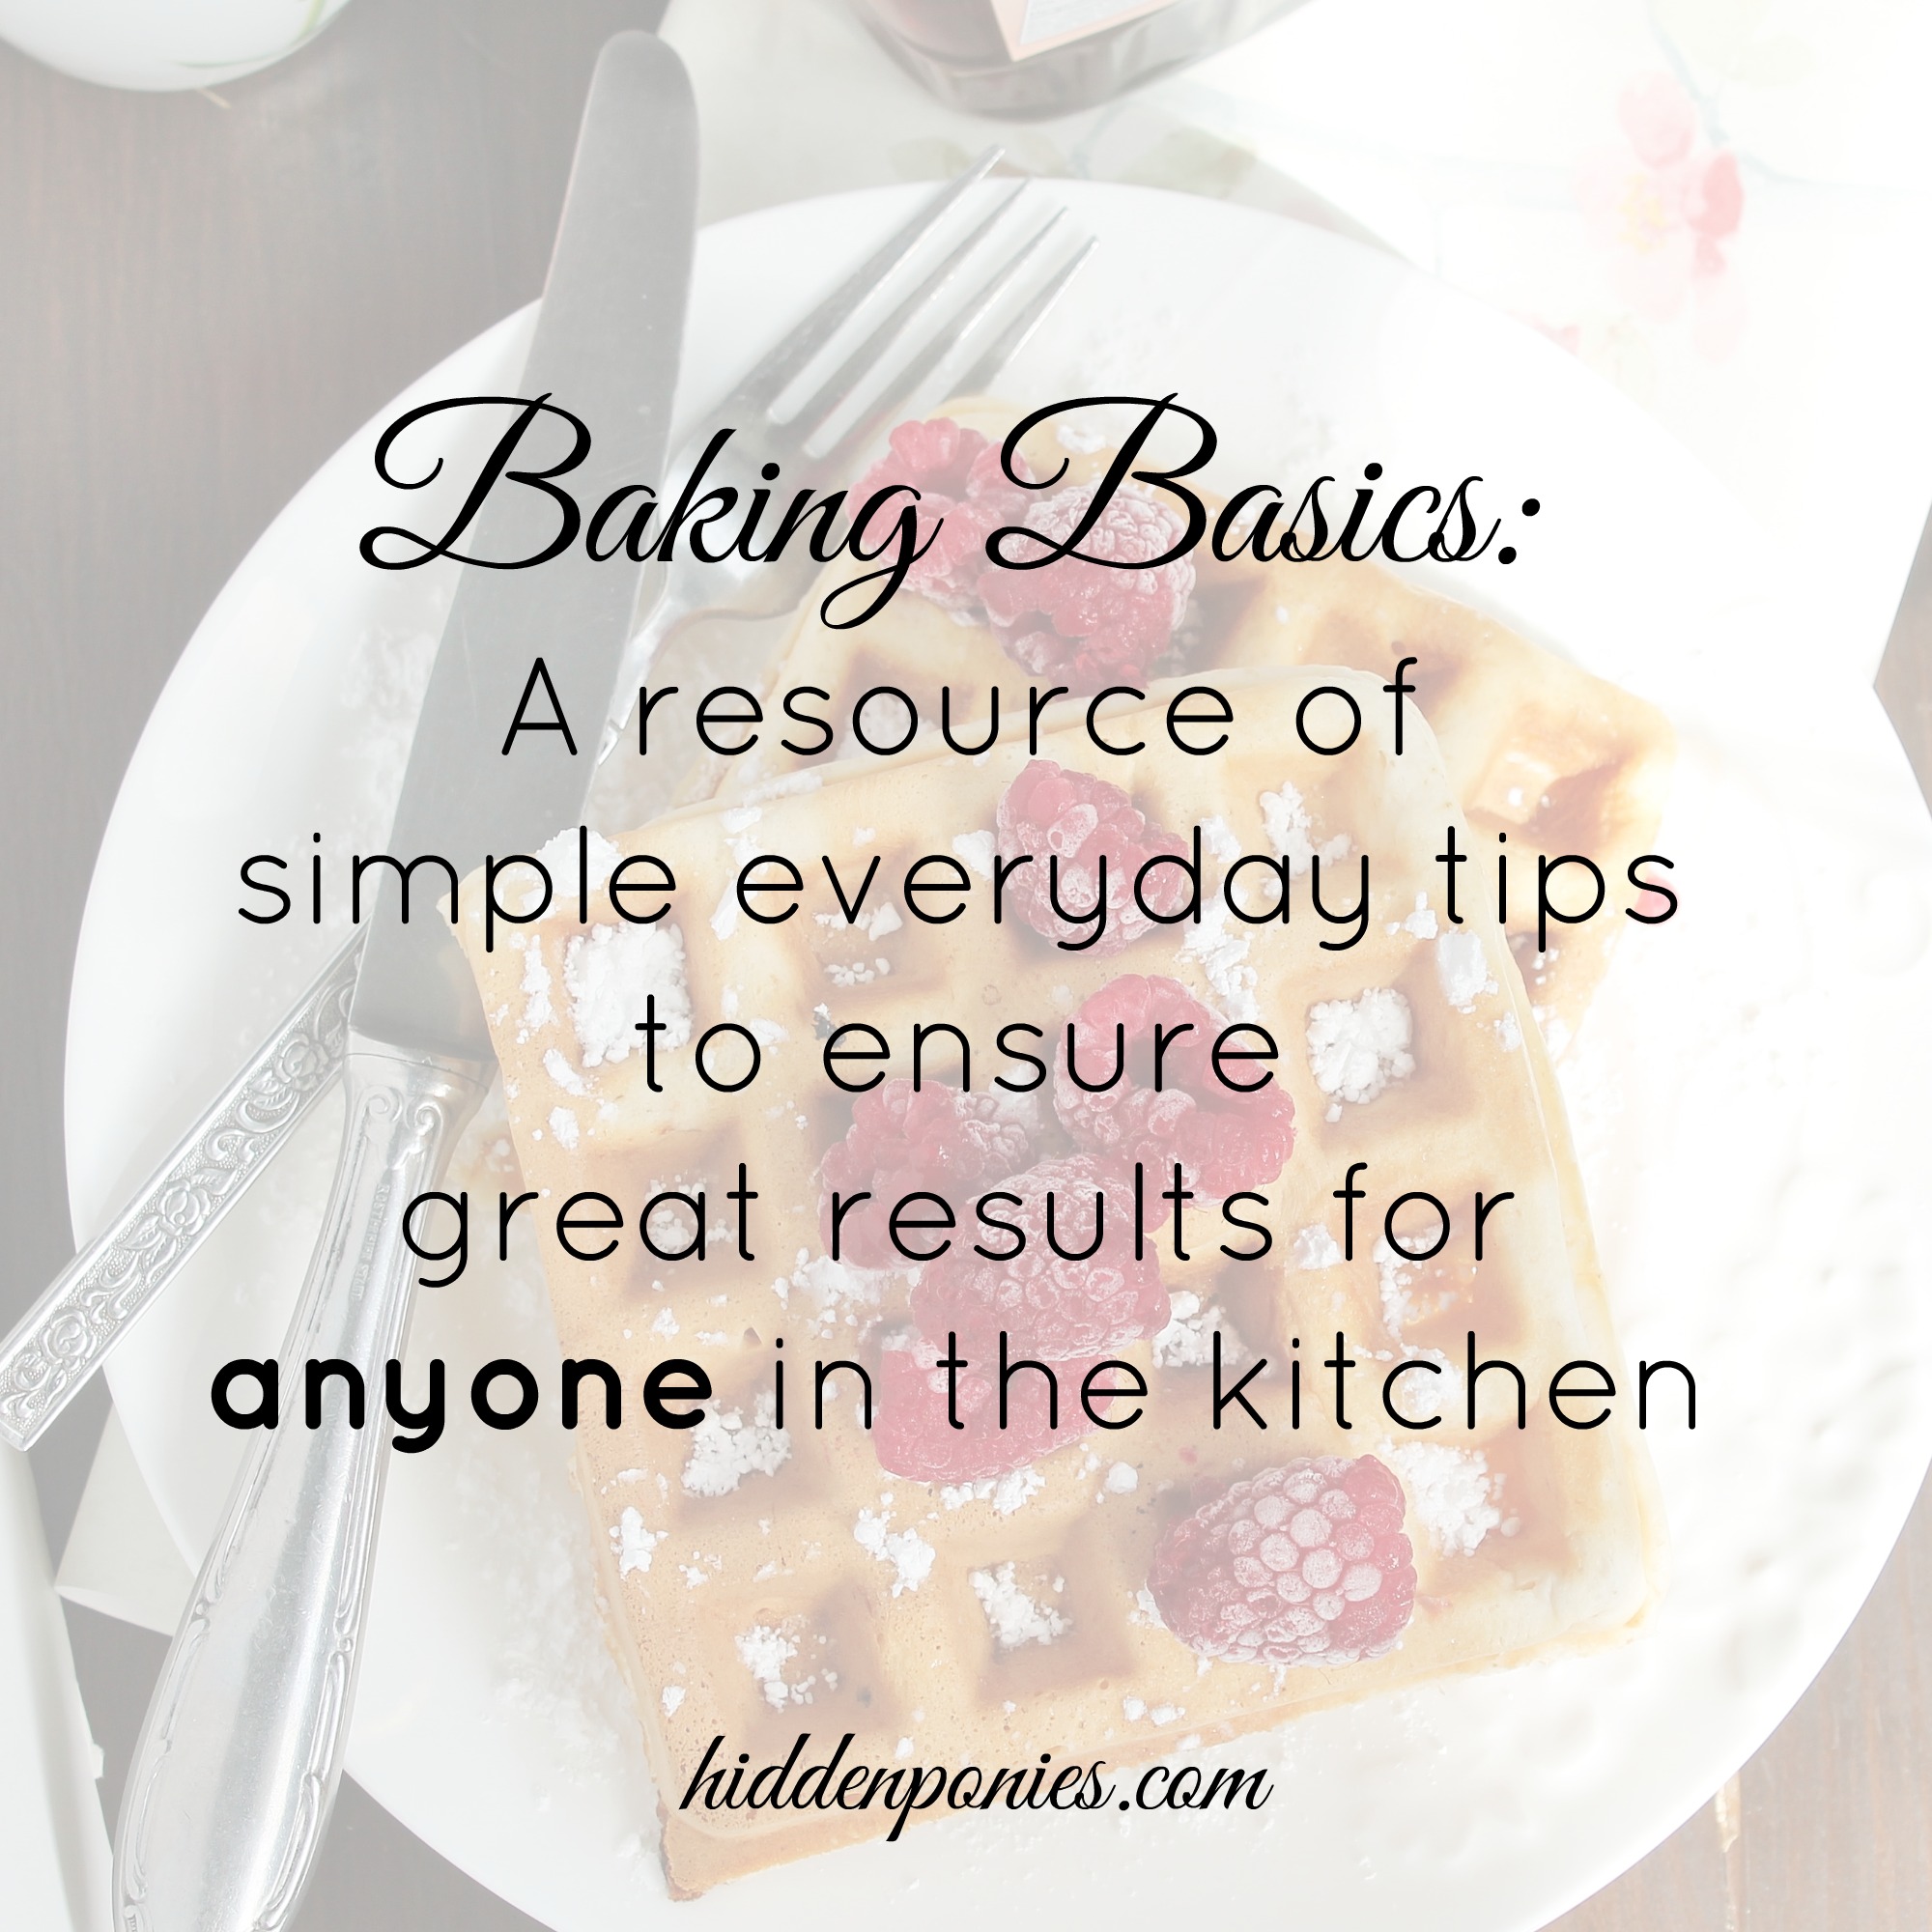 Basic Baking Tips to make sure recipes work for you!